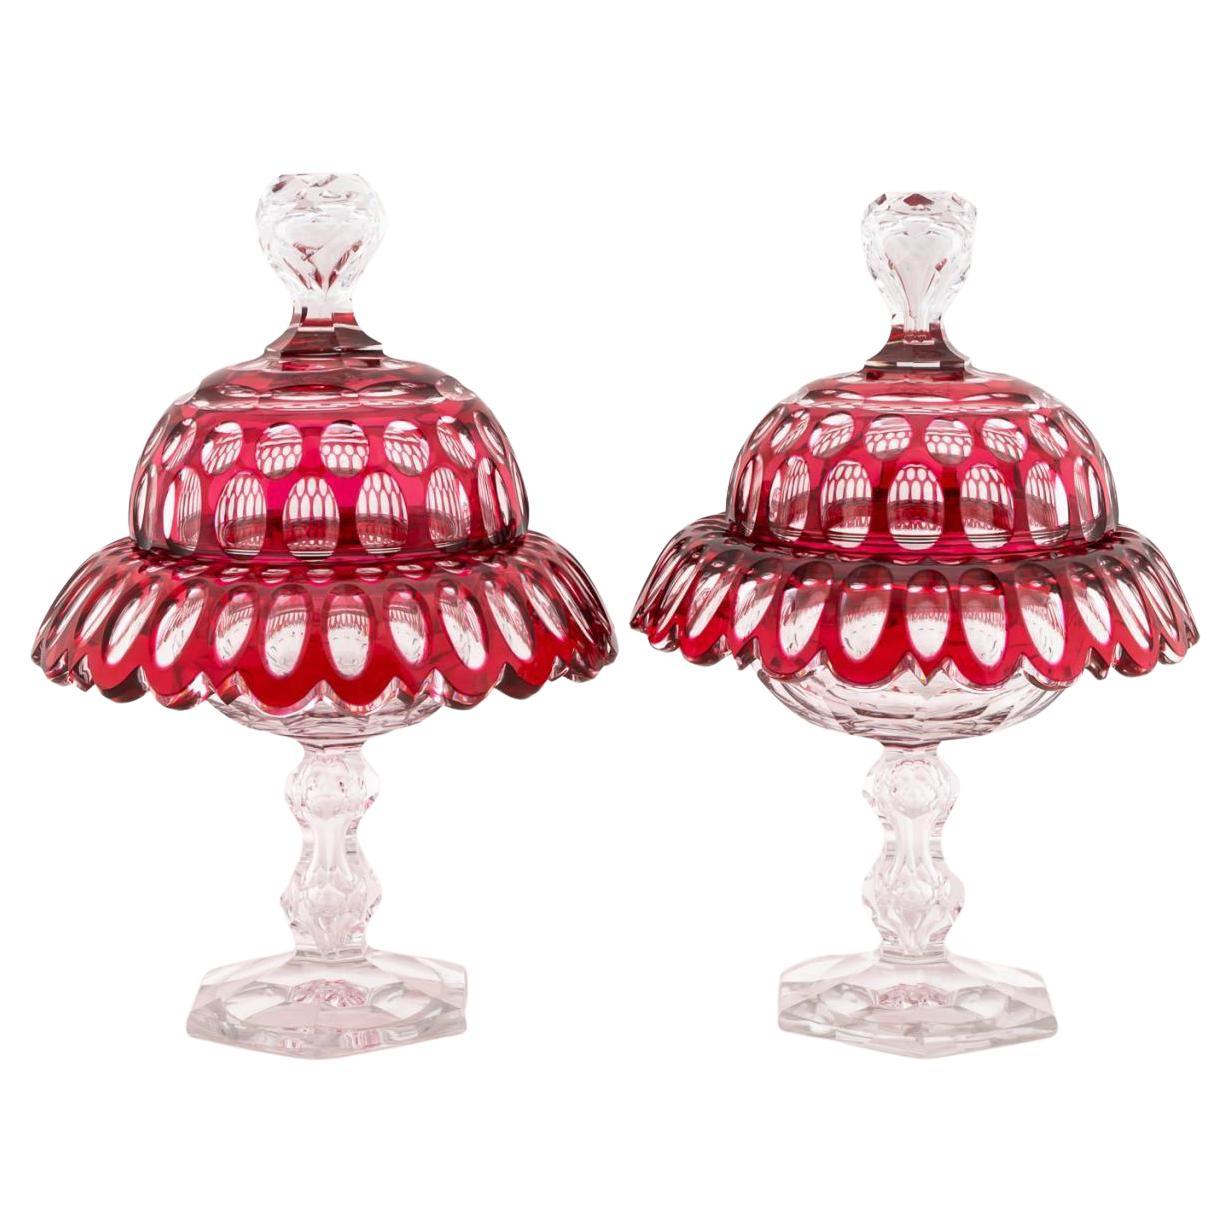 Pair of Bohemian Cranberry Cut Glass Lidded Compotes